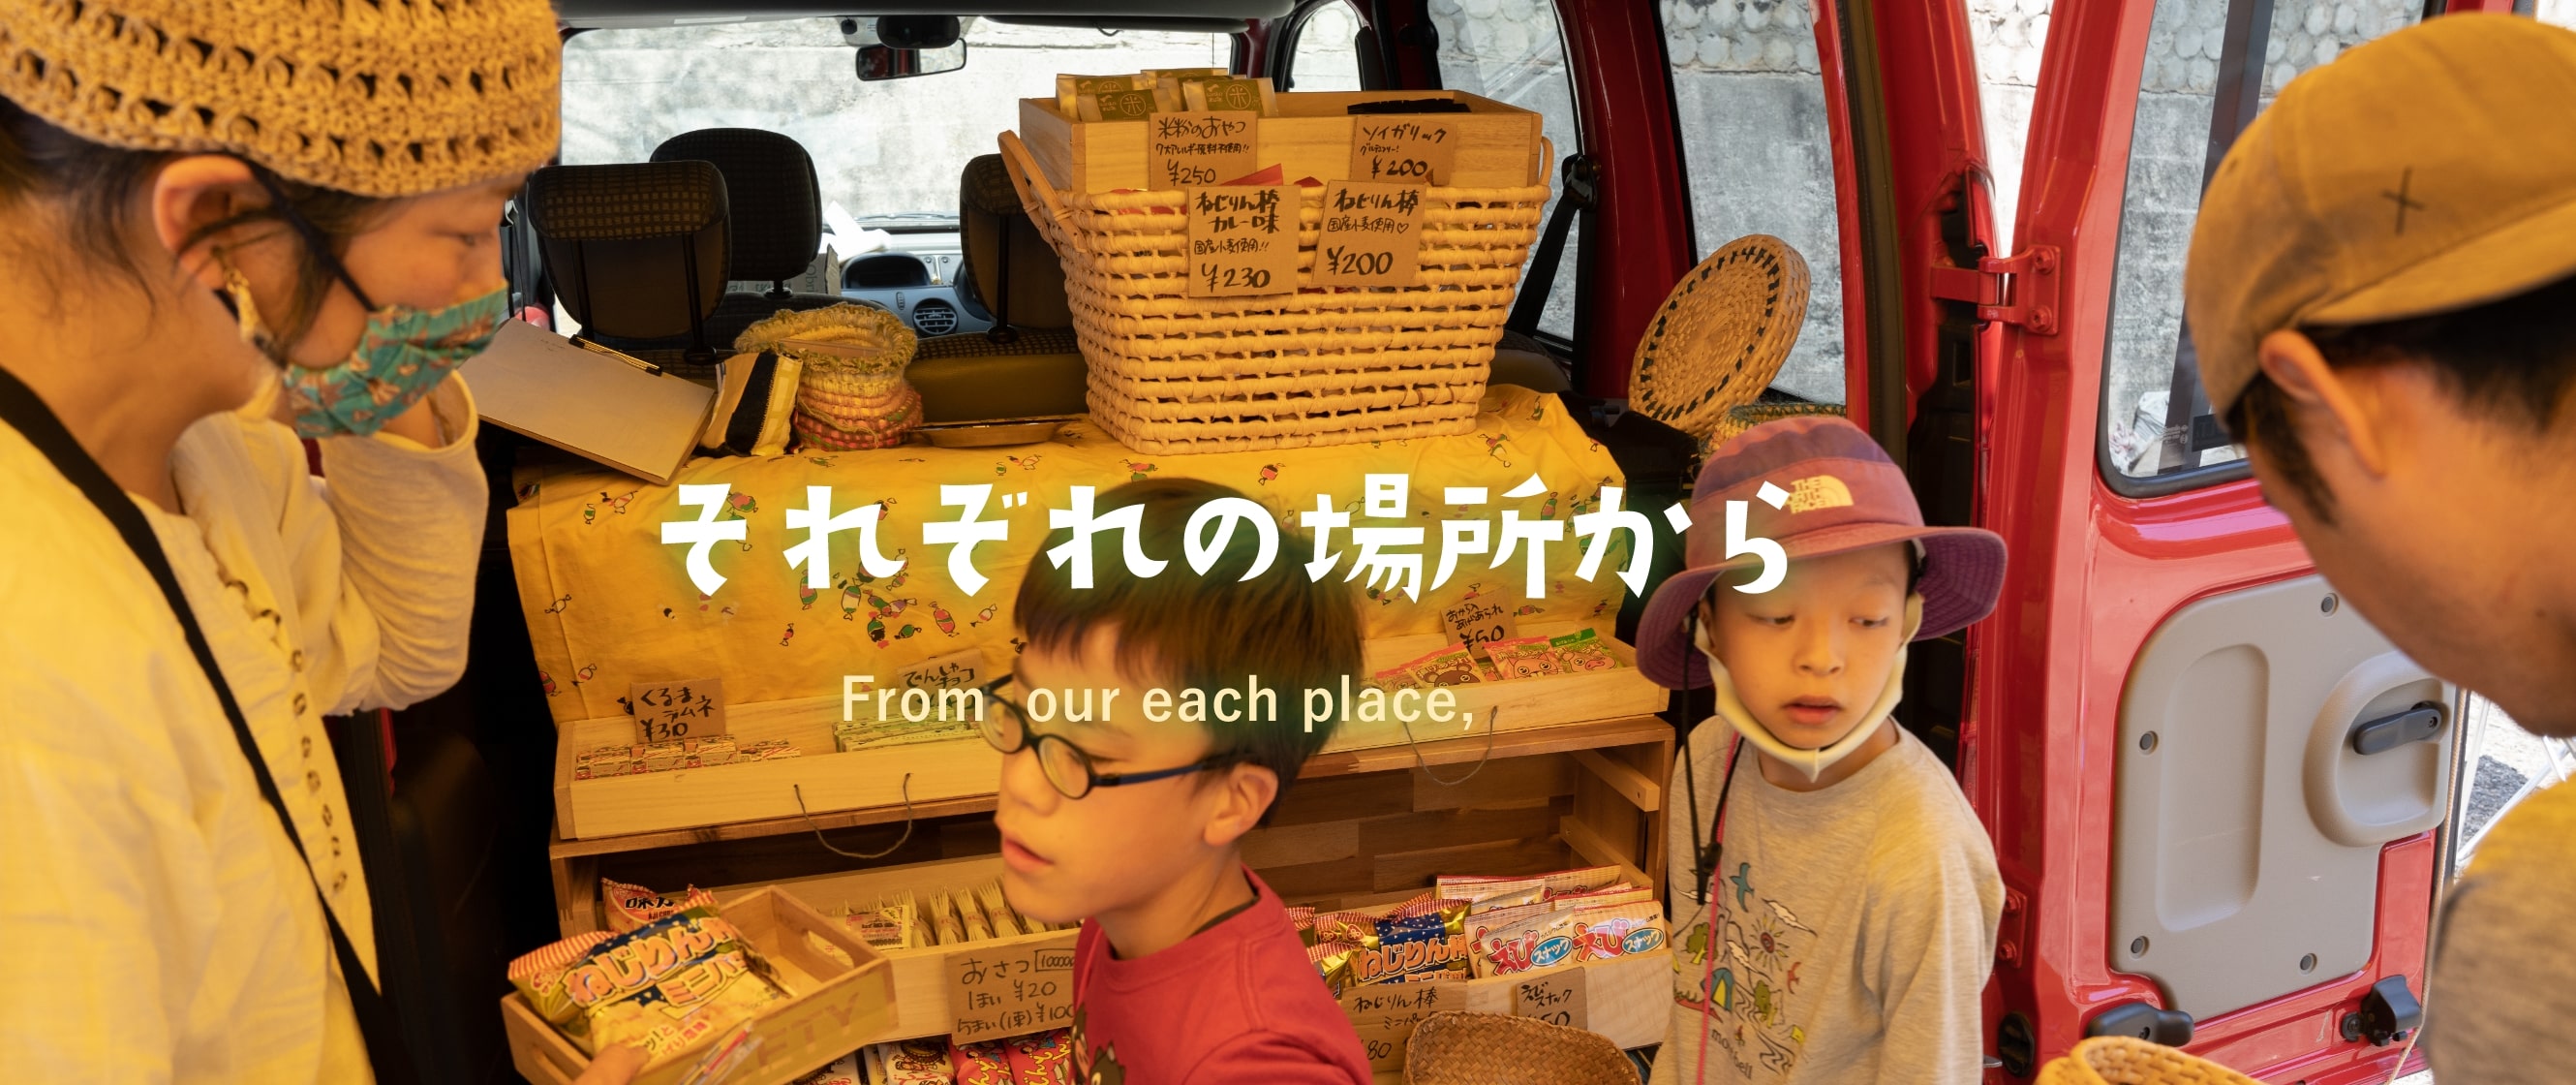 From  our each place,　それぞれの場所から